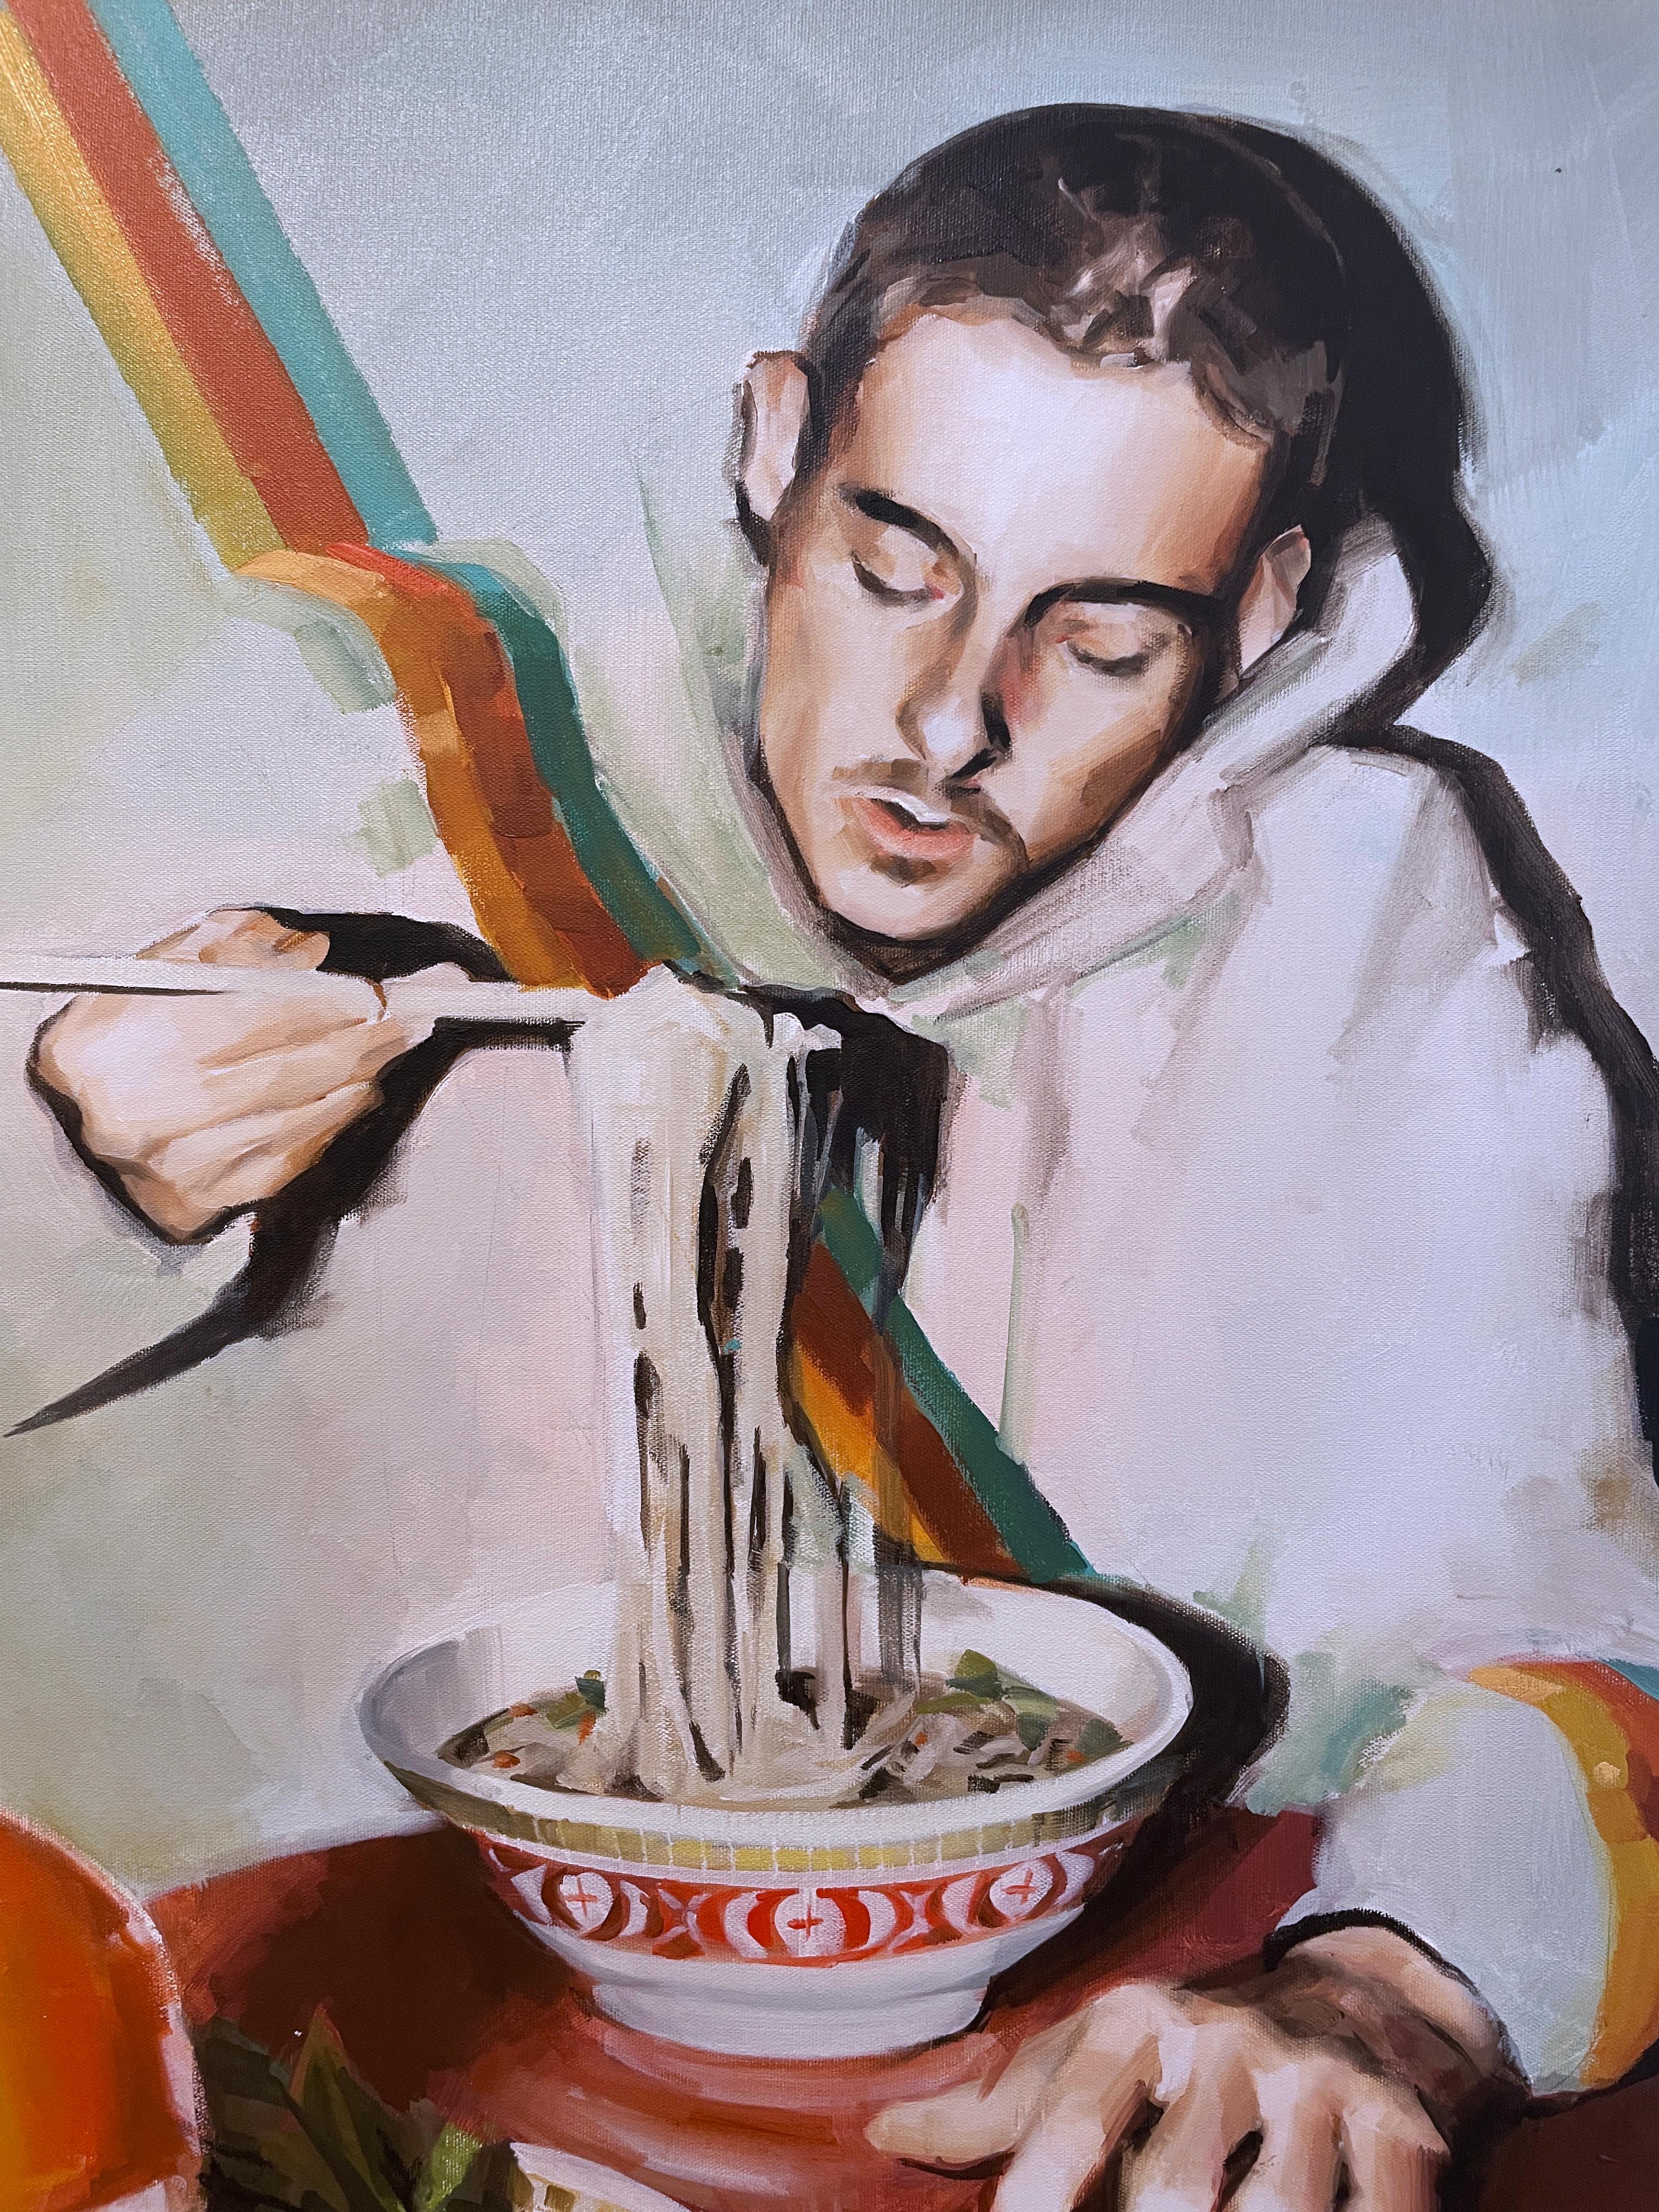 Open Late (2022) oil on canvas, figurative, man dining on bowl of noodles, ramen - Contemporary Painting by RU8ICON1